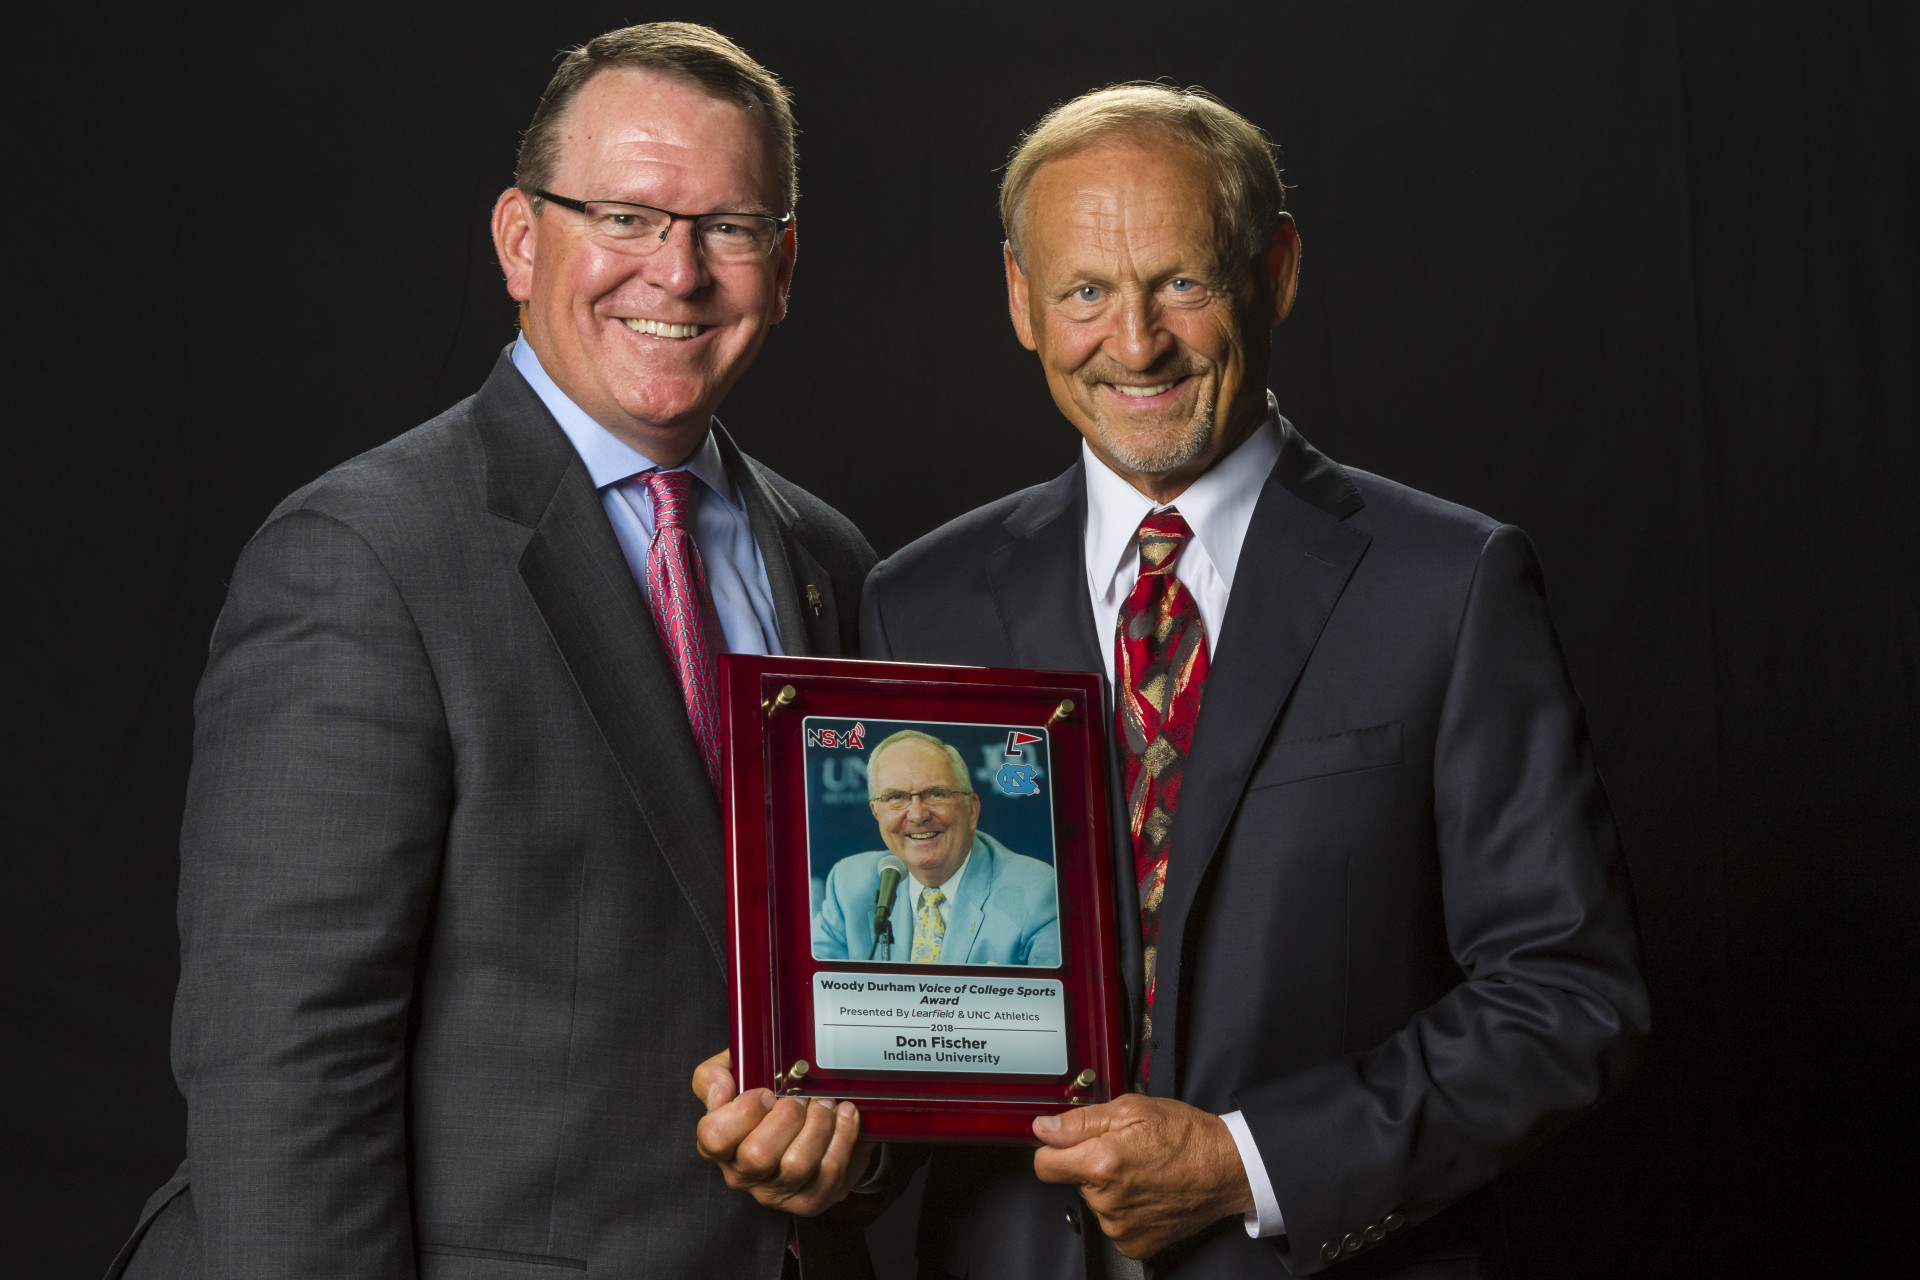 Wes Durham (left), son of the late Woody Durham, with Indiana University pay-by-play announcer Don Fischer, winner of the first Woody Durham Voice of College Sports Award